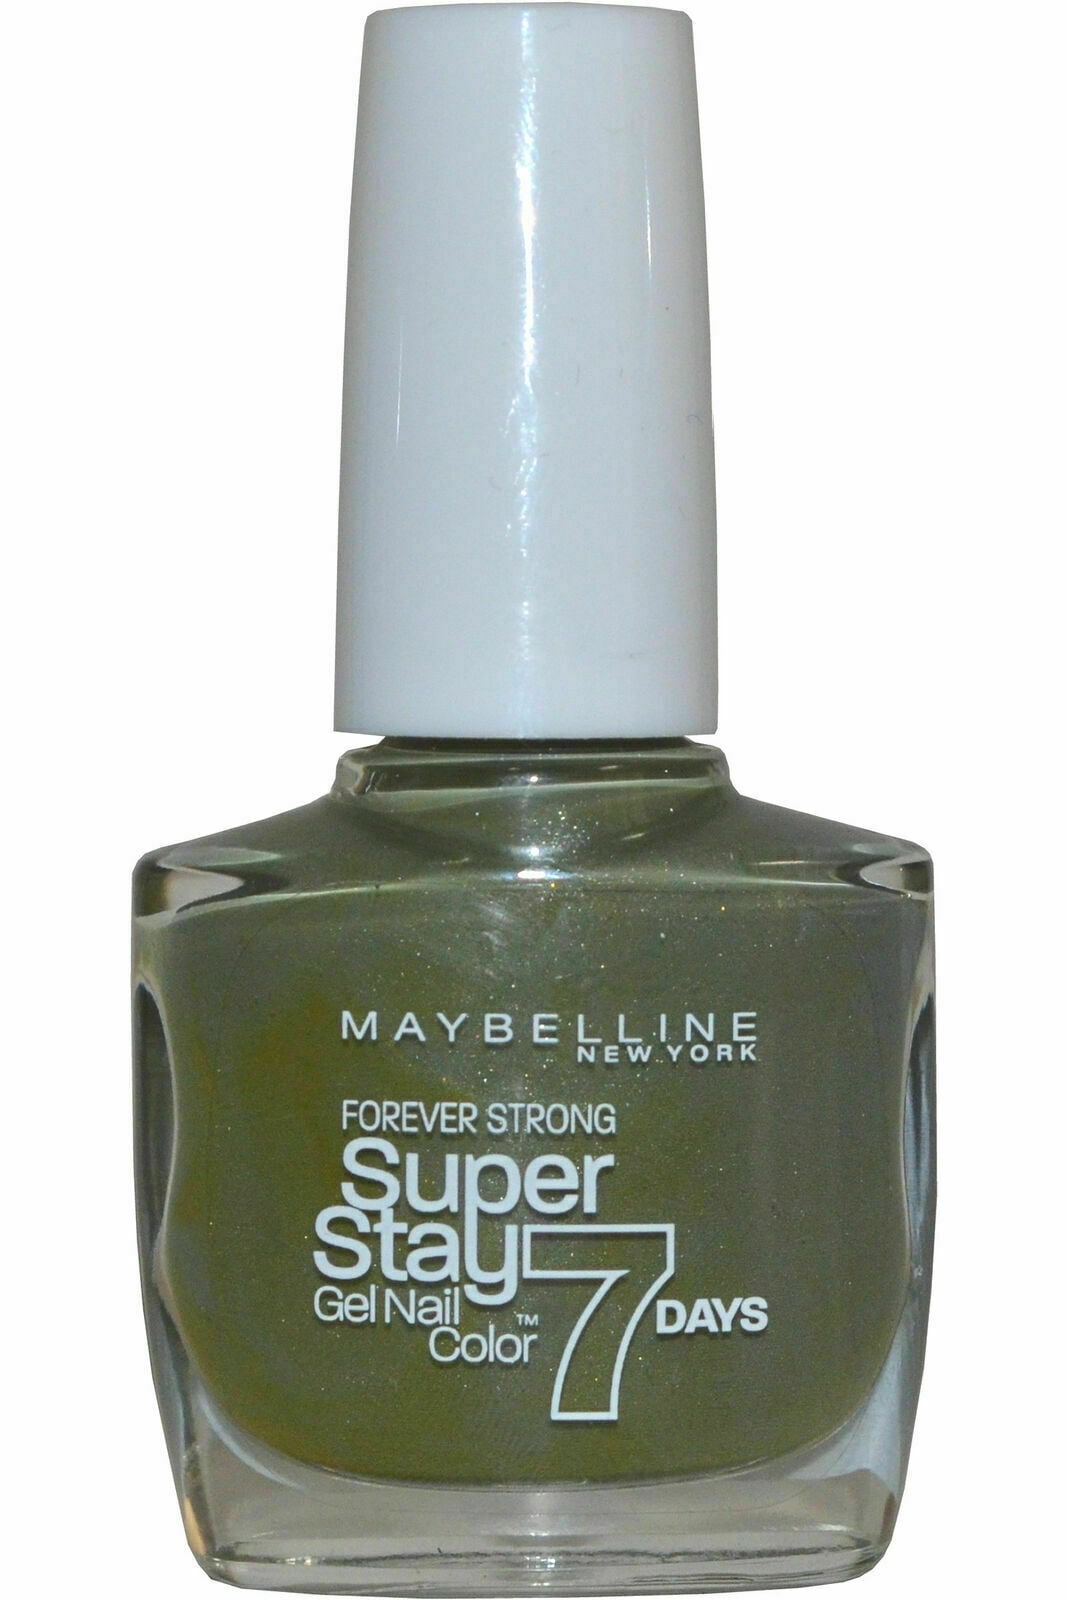 Maybelline Forever Strong Stay Forever Day Polish Super 7 GEL Moss #620 Nail